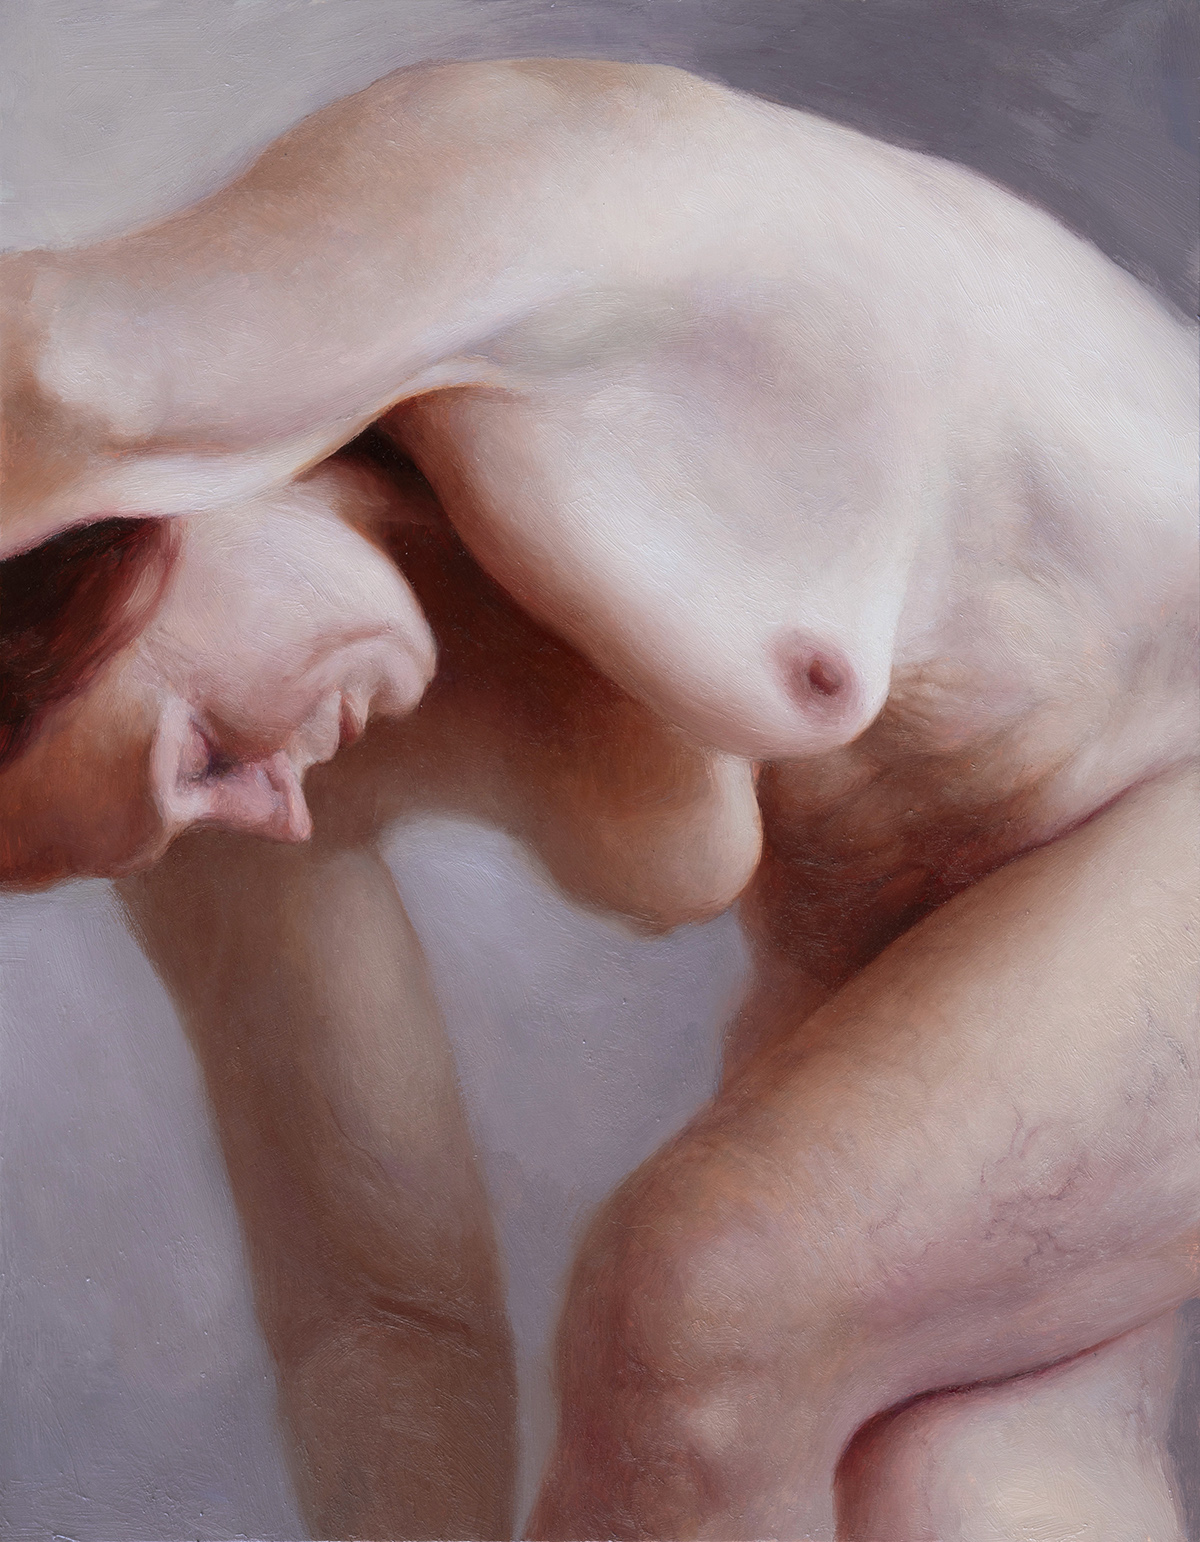 oil painting of a close up of a nude figure, the woman is leaning down-stretching arms out